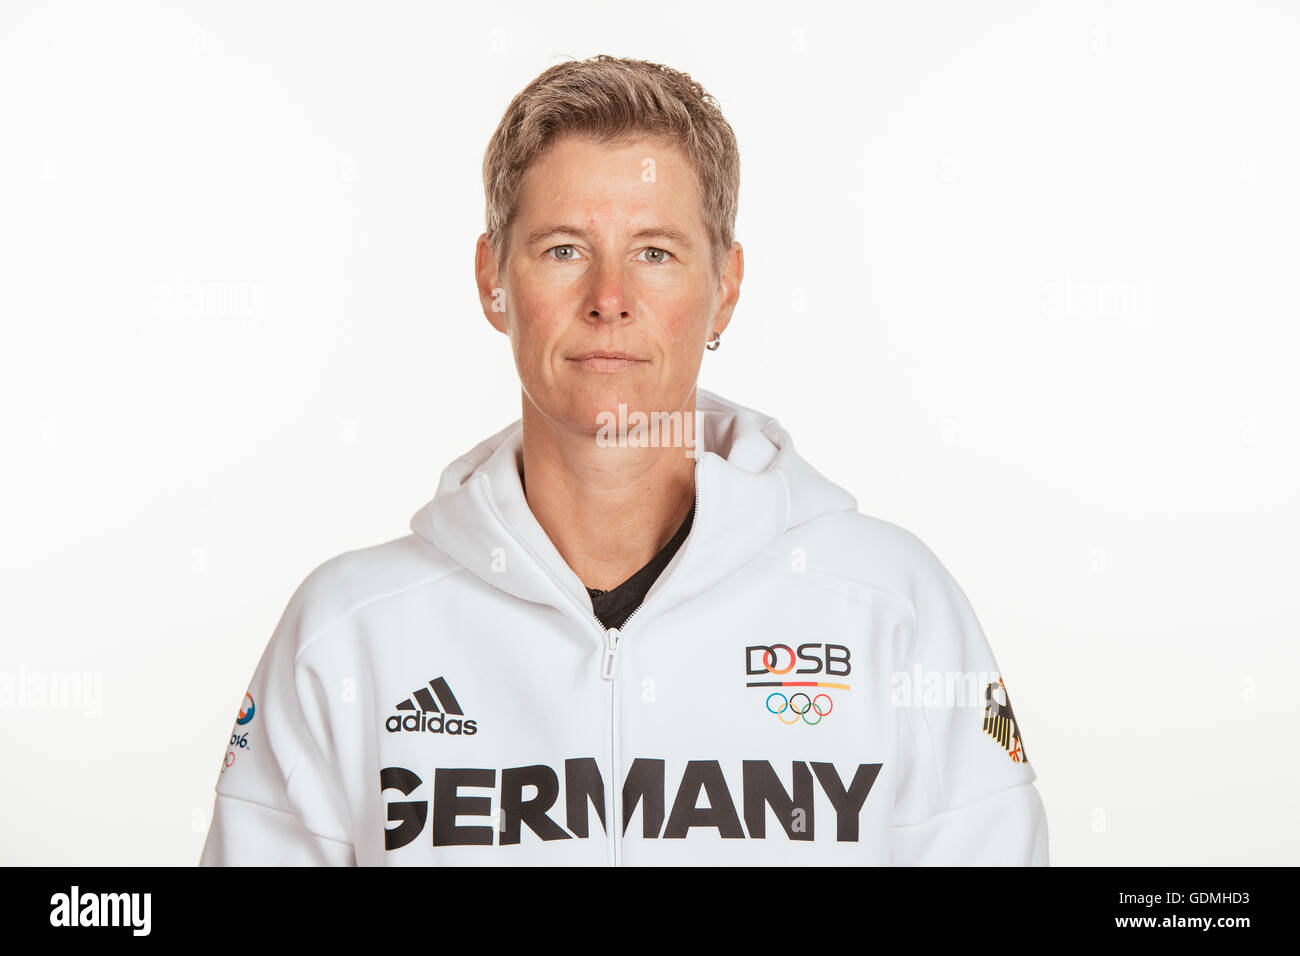 Hannover, Germany. 18th July, 2016. Birgit Halsband poses at a photocall during the preparations for the Olympic Games in Rio at the Emmich Cambrai Barracks in Hanover, Germany, taken on 15/07/16 | usage worldwide © dpa/Alamy Live News Stock Photo